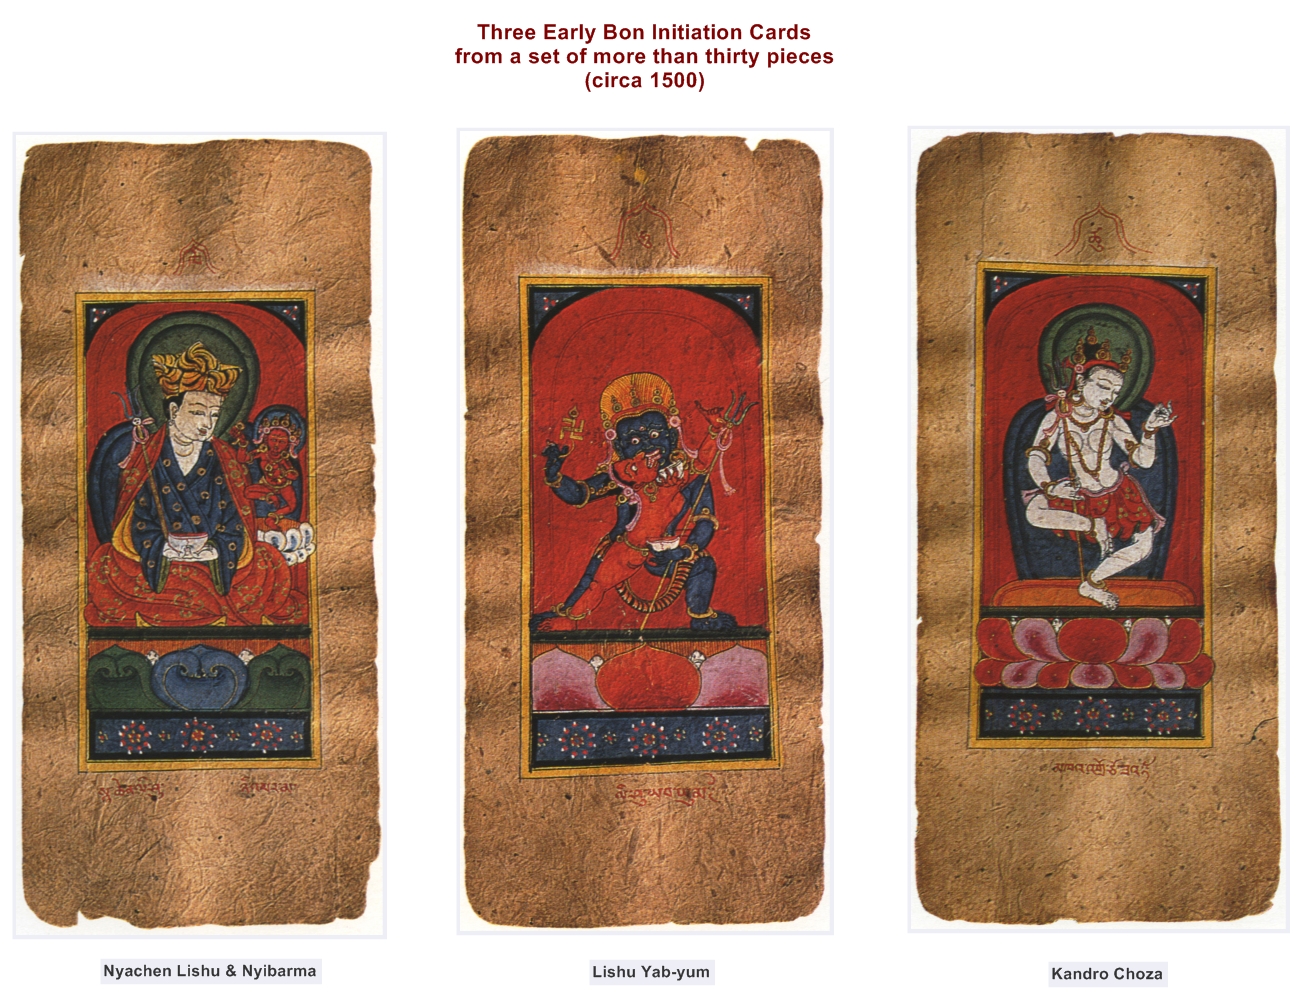 Three Early Bon Initiation Cards from a set of more than thirty pieces (circa 1500)